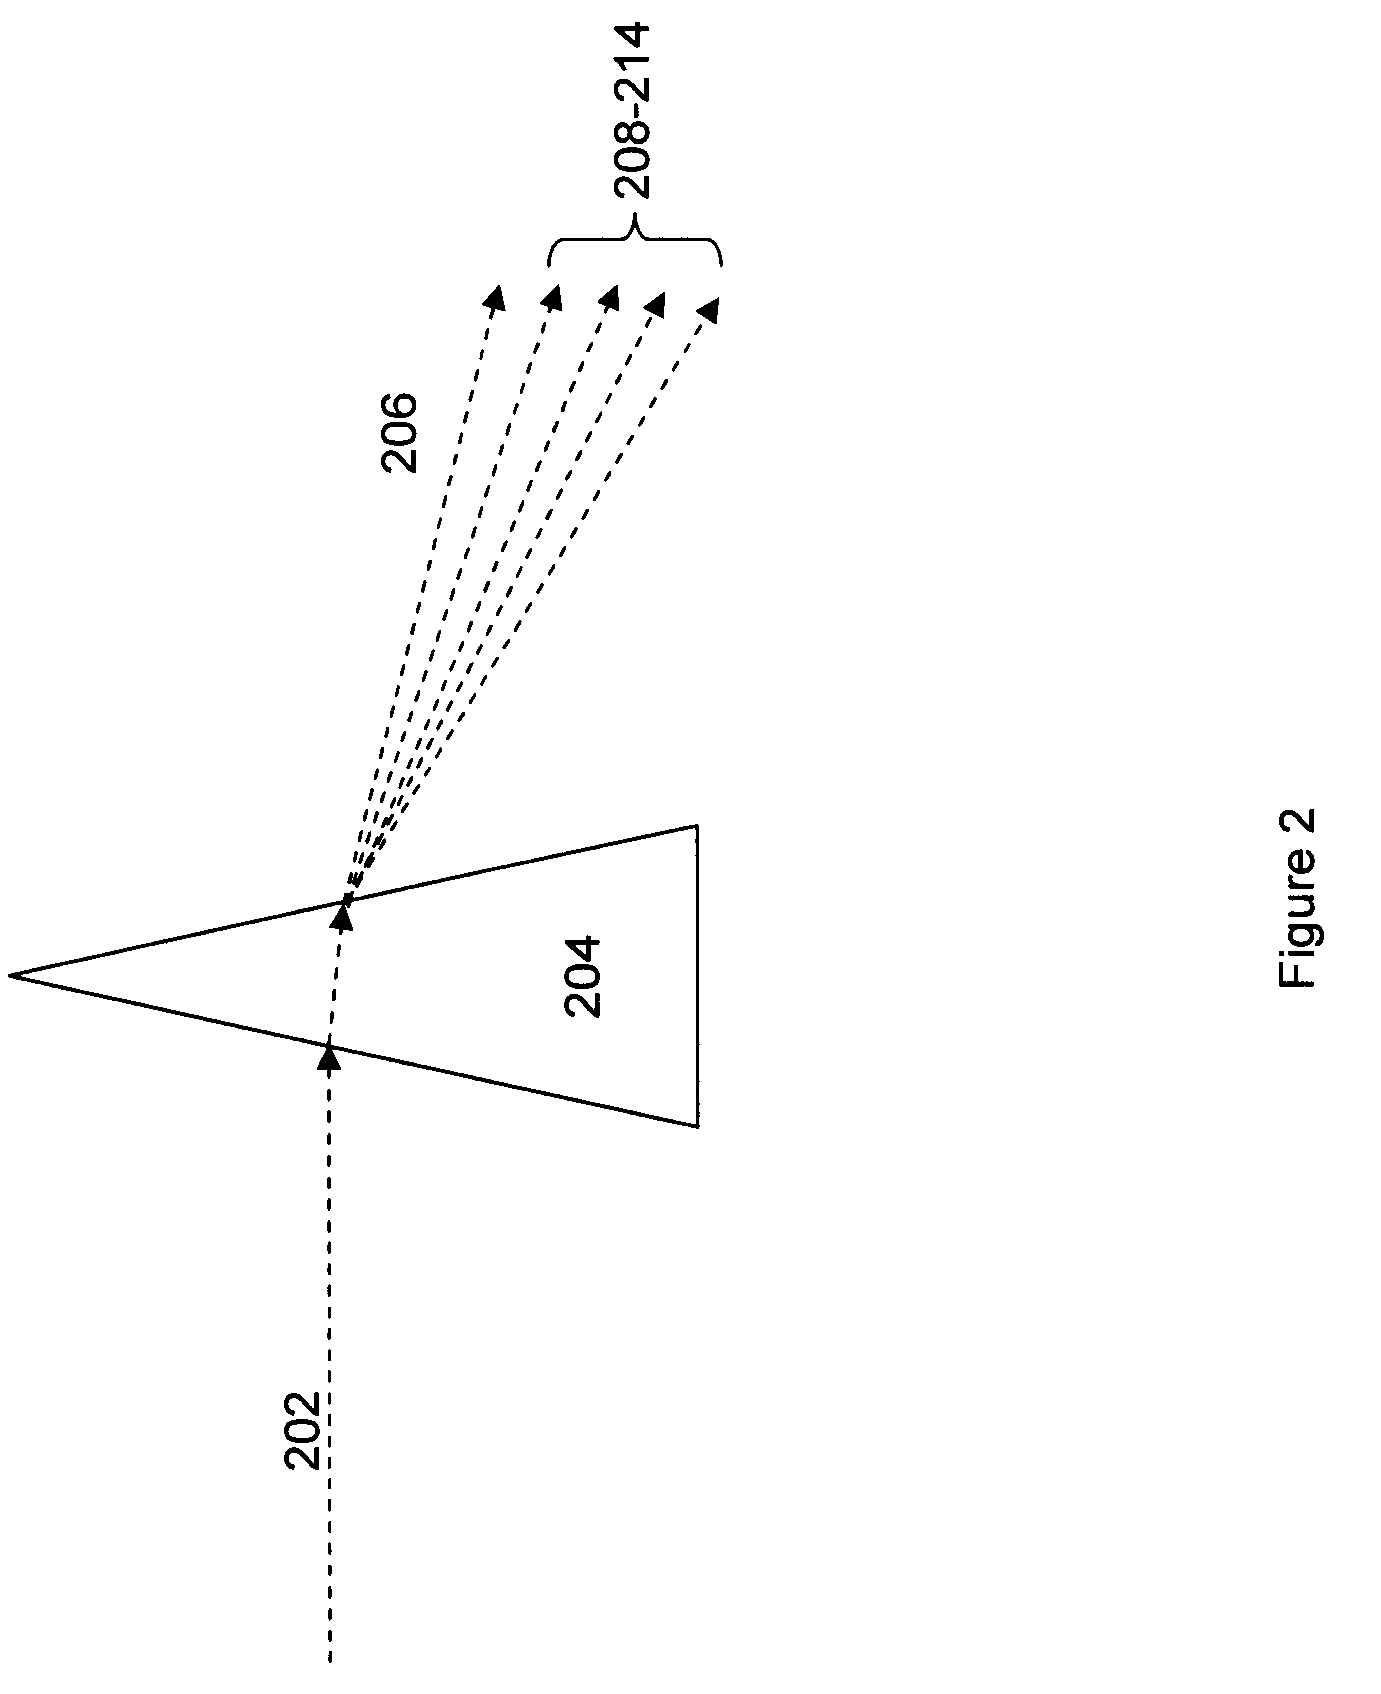 Modular optical components and systems incorporating same